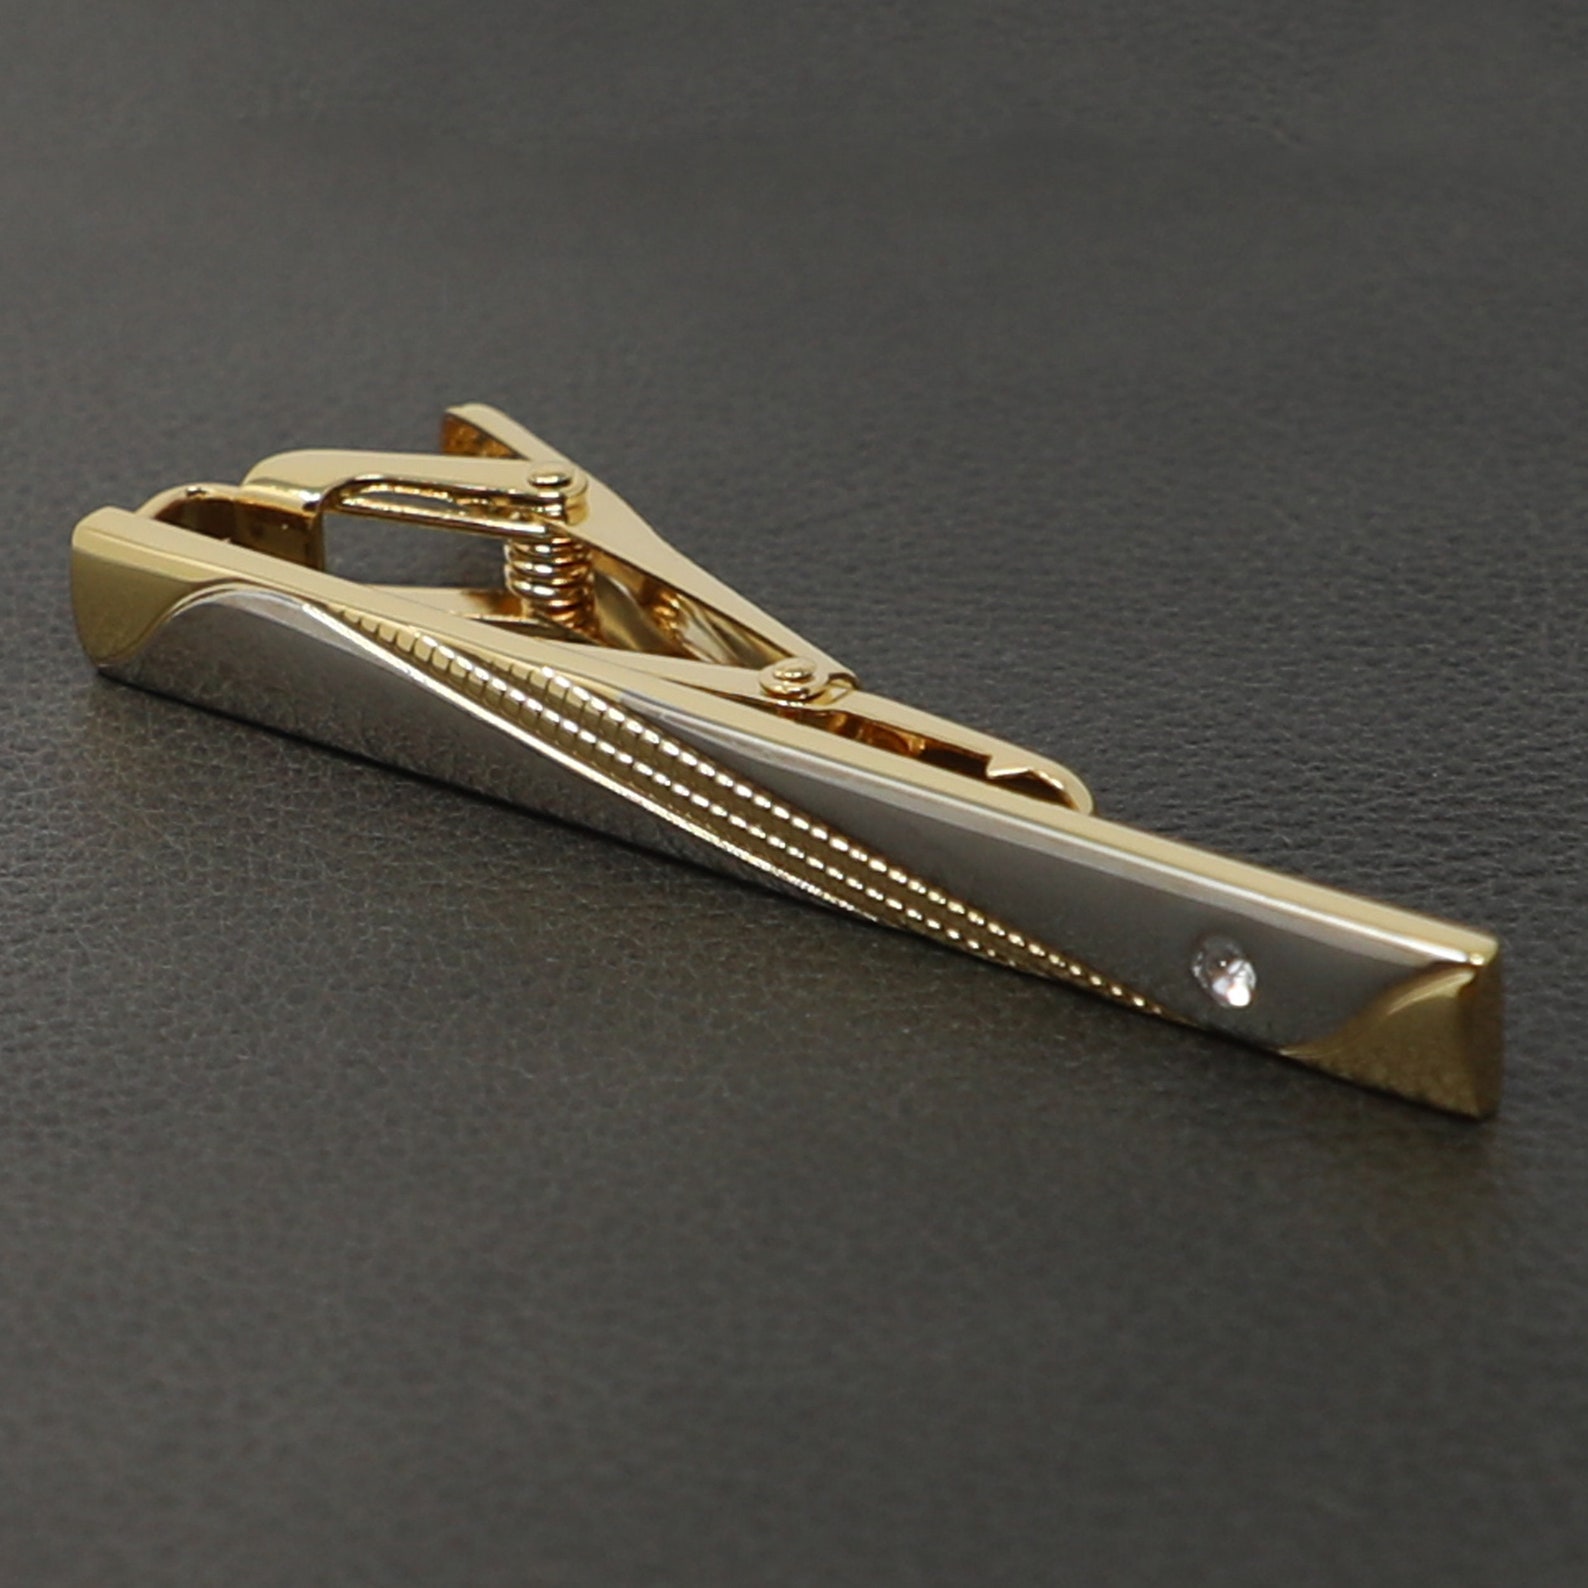 Silver and Gold Two-tone Finish Tie Clip Tie Bar Best Birthday - Etsy